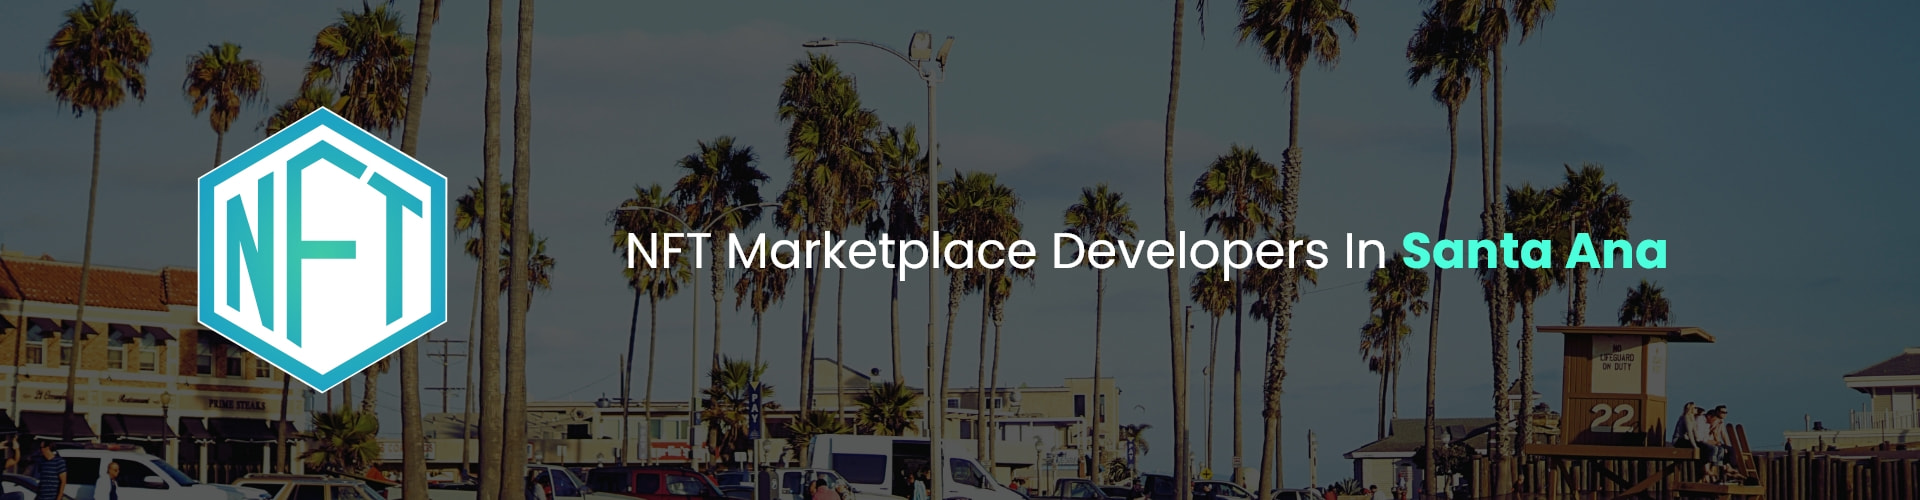 hire nft marketplace developers in santa ana